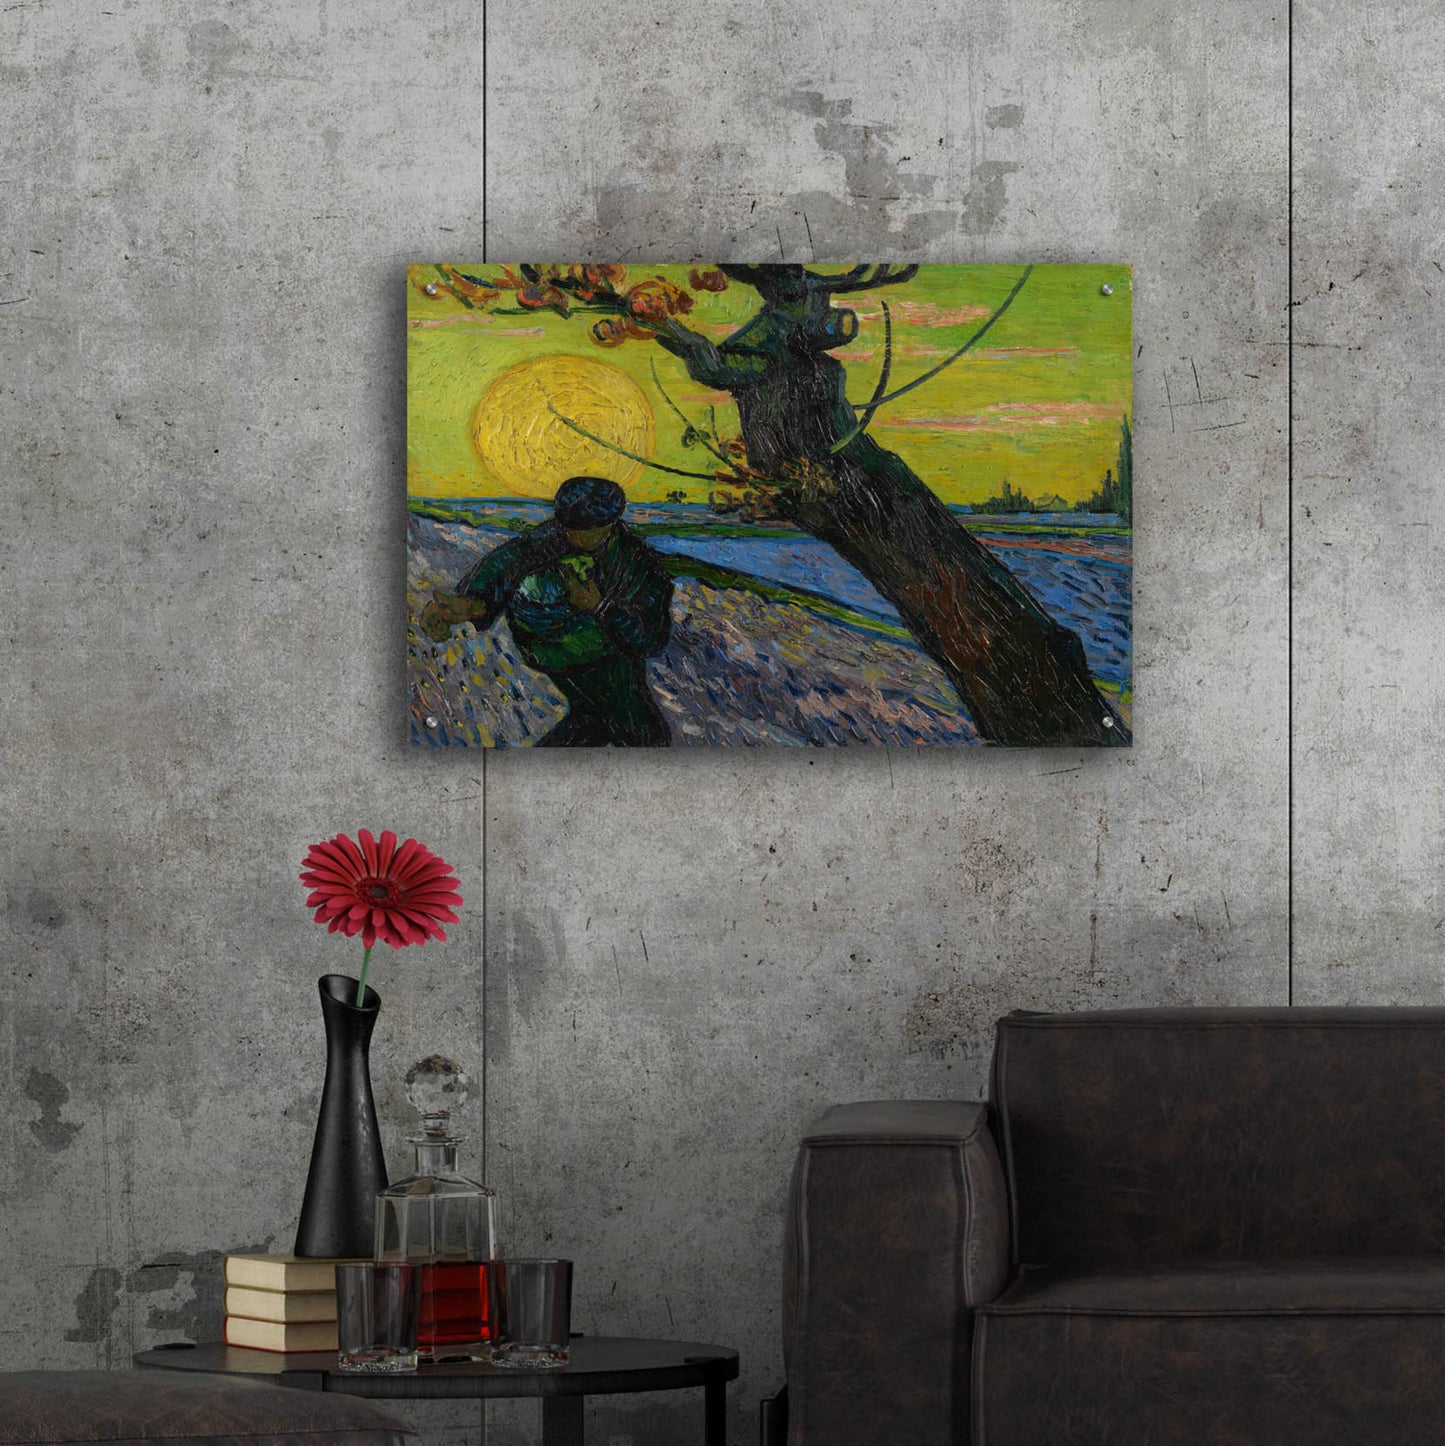 Epic Art 'The Sower' by Vincent Van Gogh, Acrylic Glass Wall Art,36x24